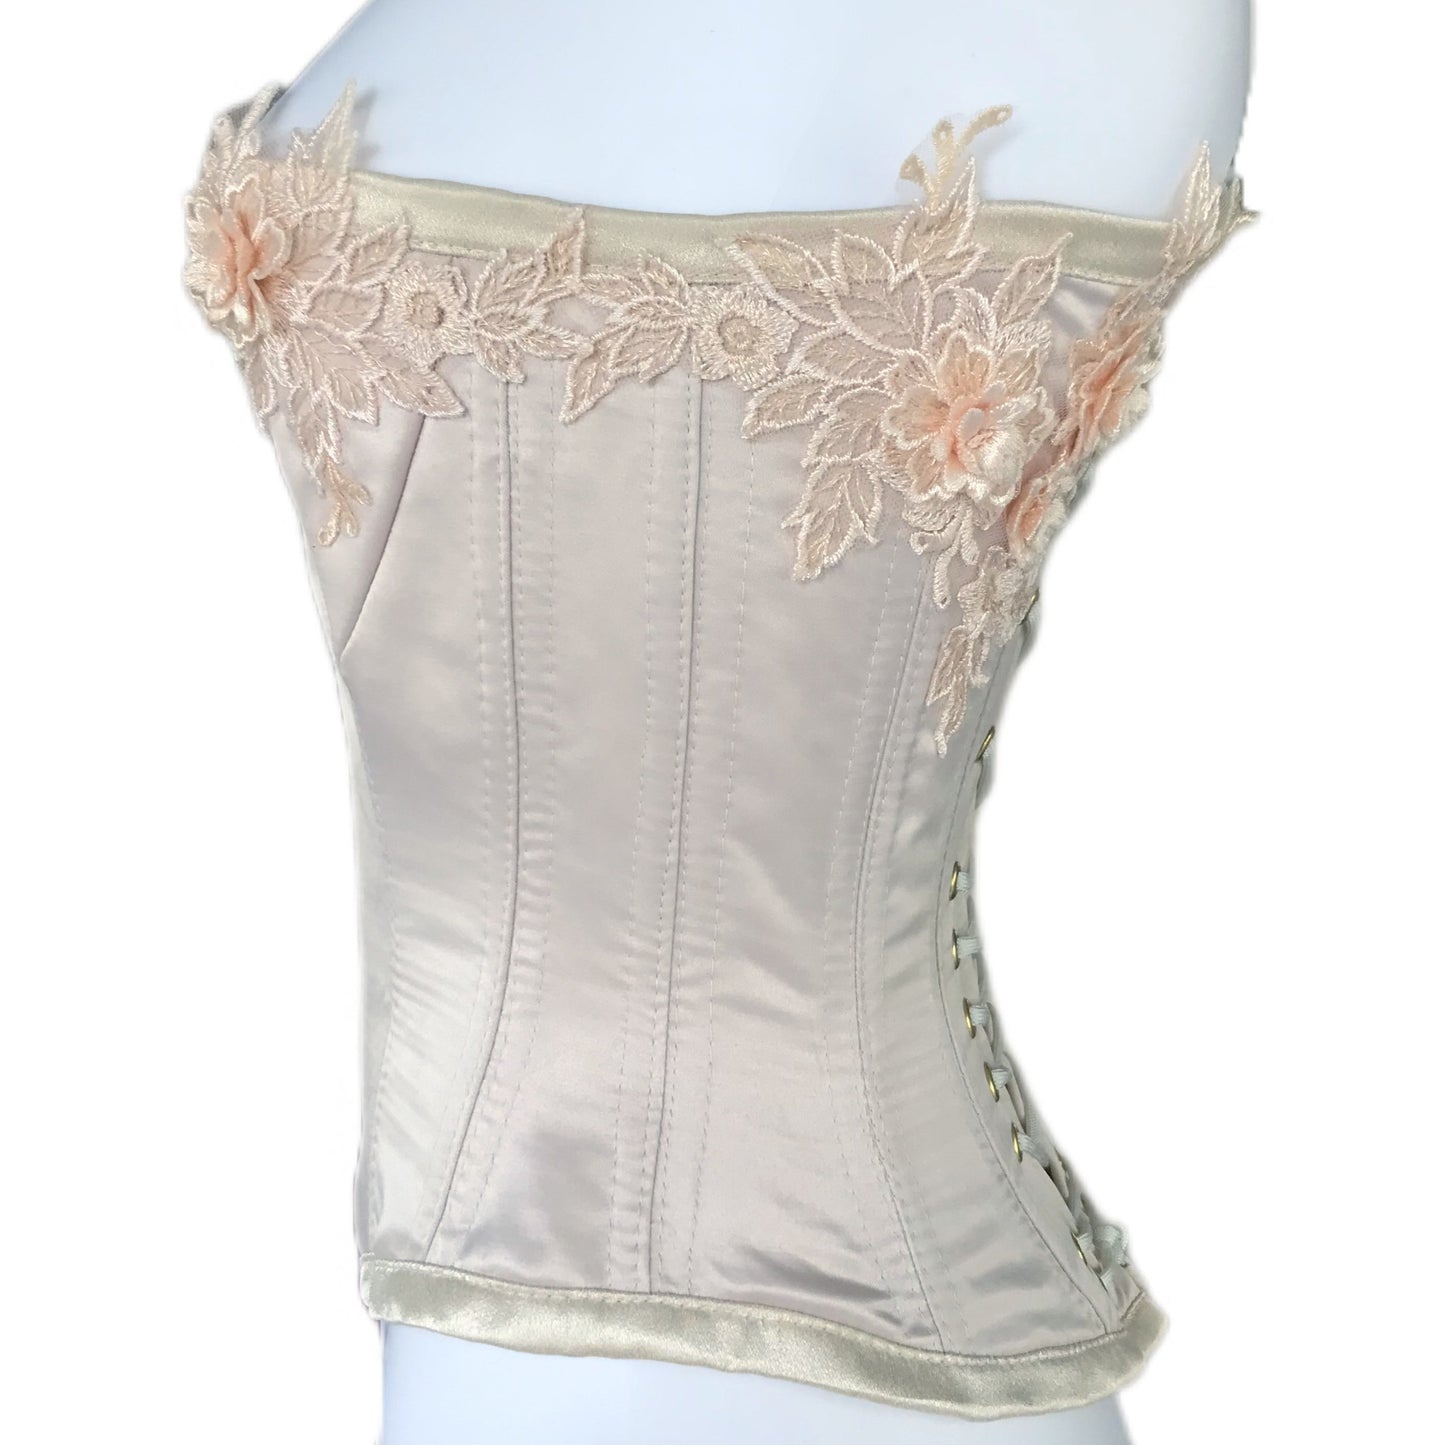 Satin and Lace Women's Corset - Ivory and Peach - Size Xs/Sm